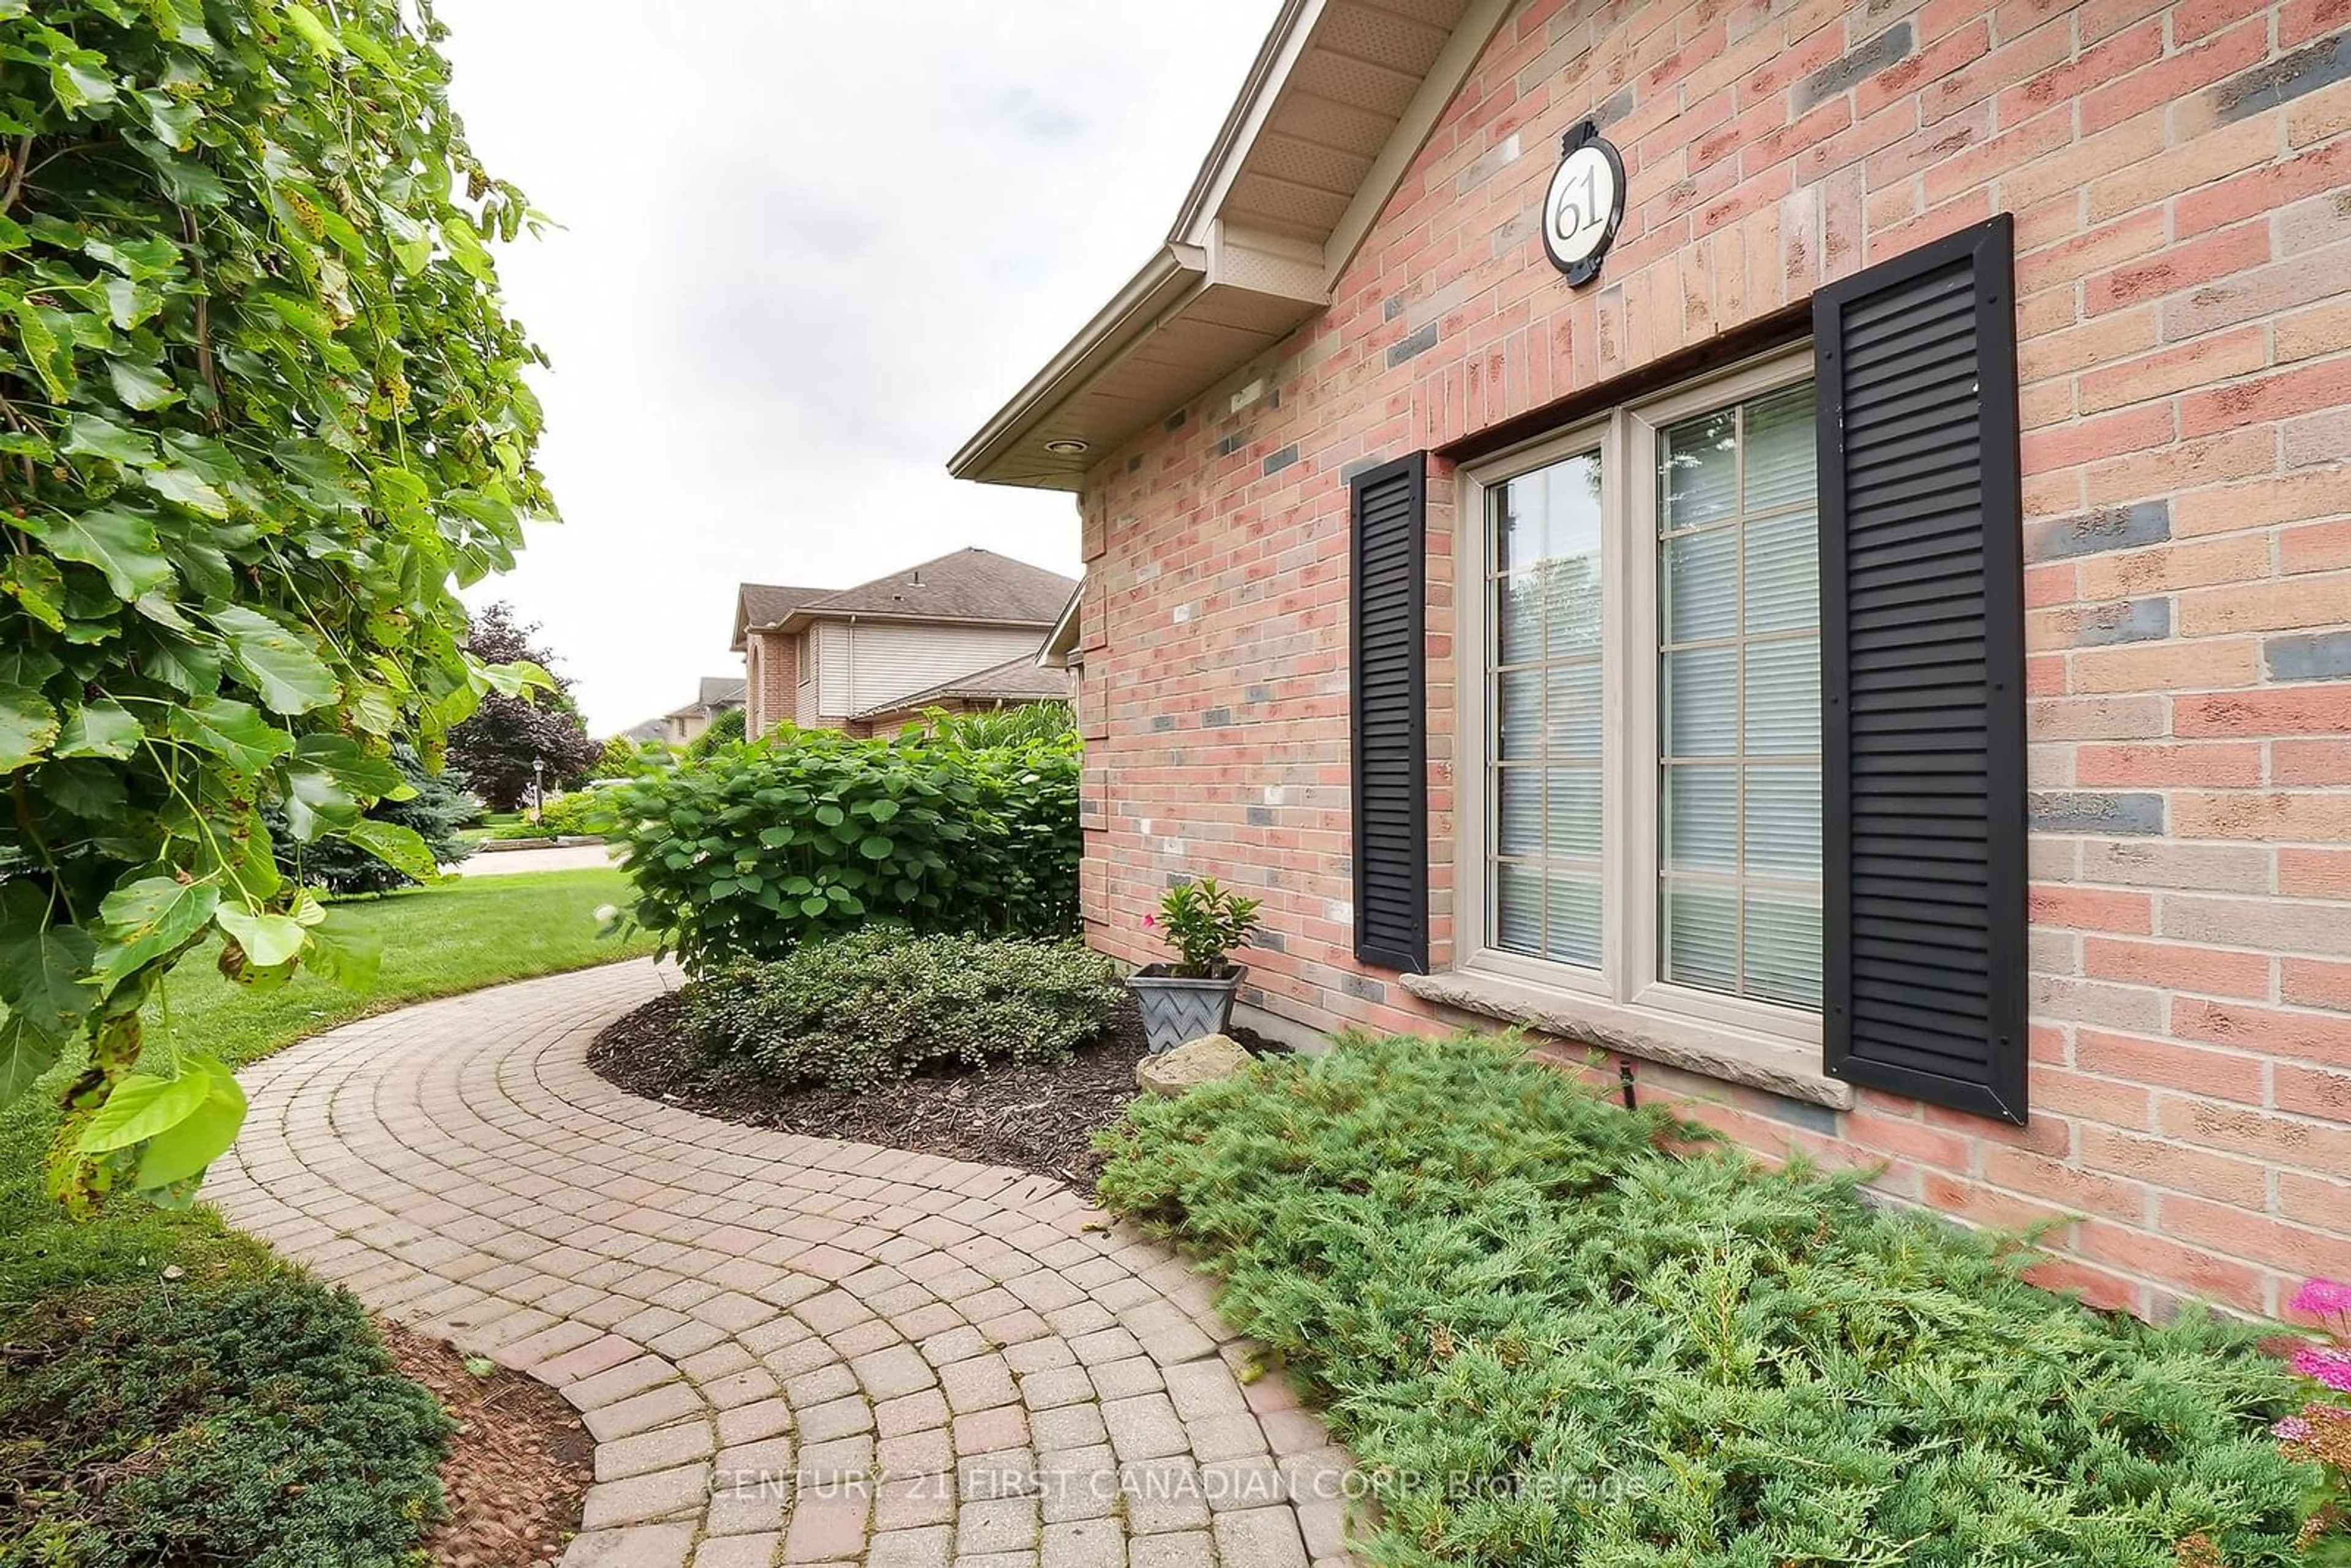 Home with brick exterior material for 61 South Carriage Rd, London Ontario N6H 5M3